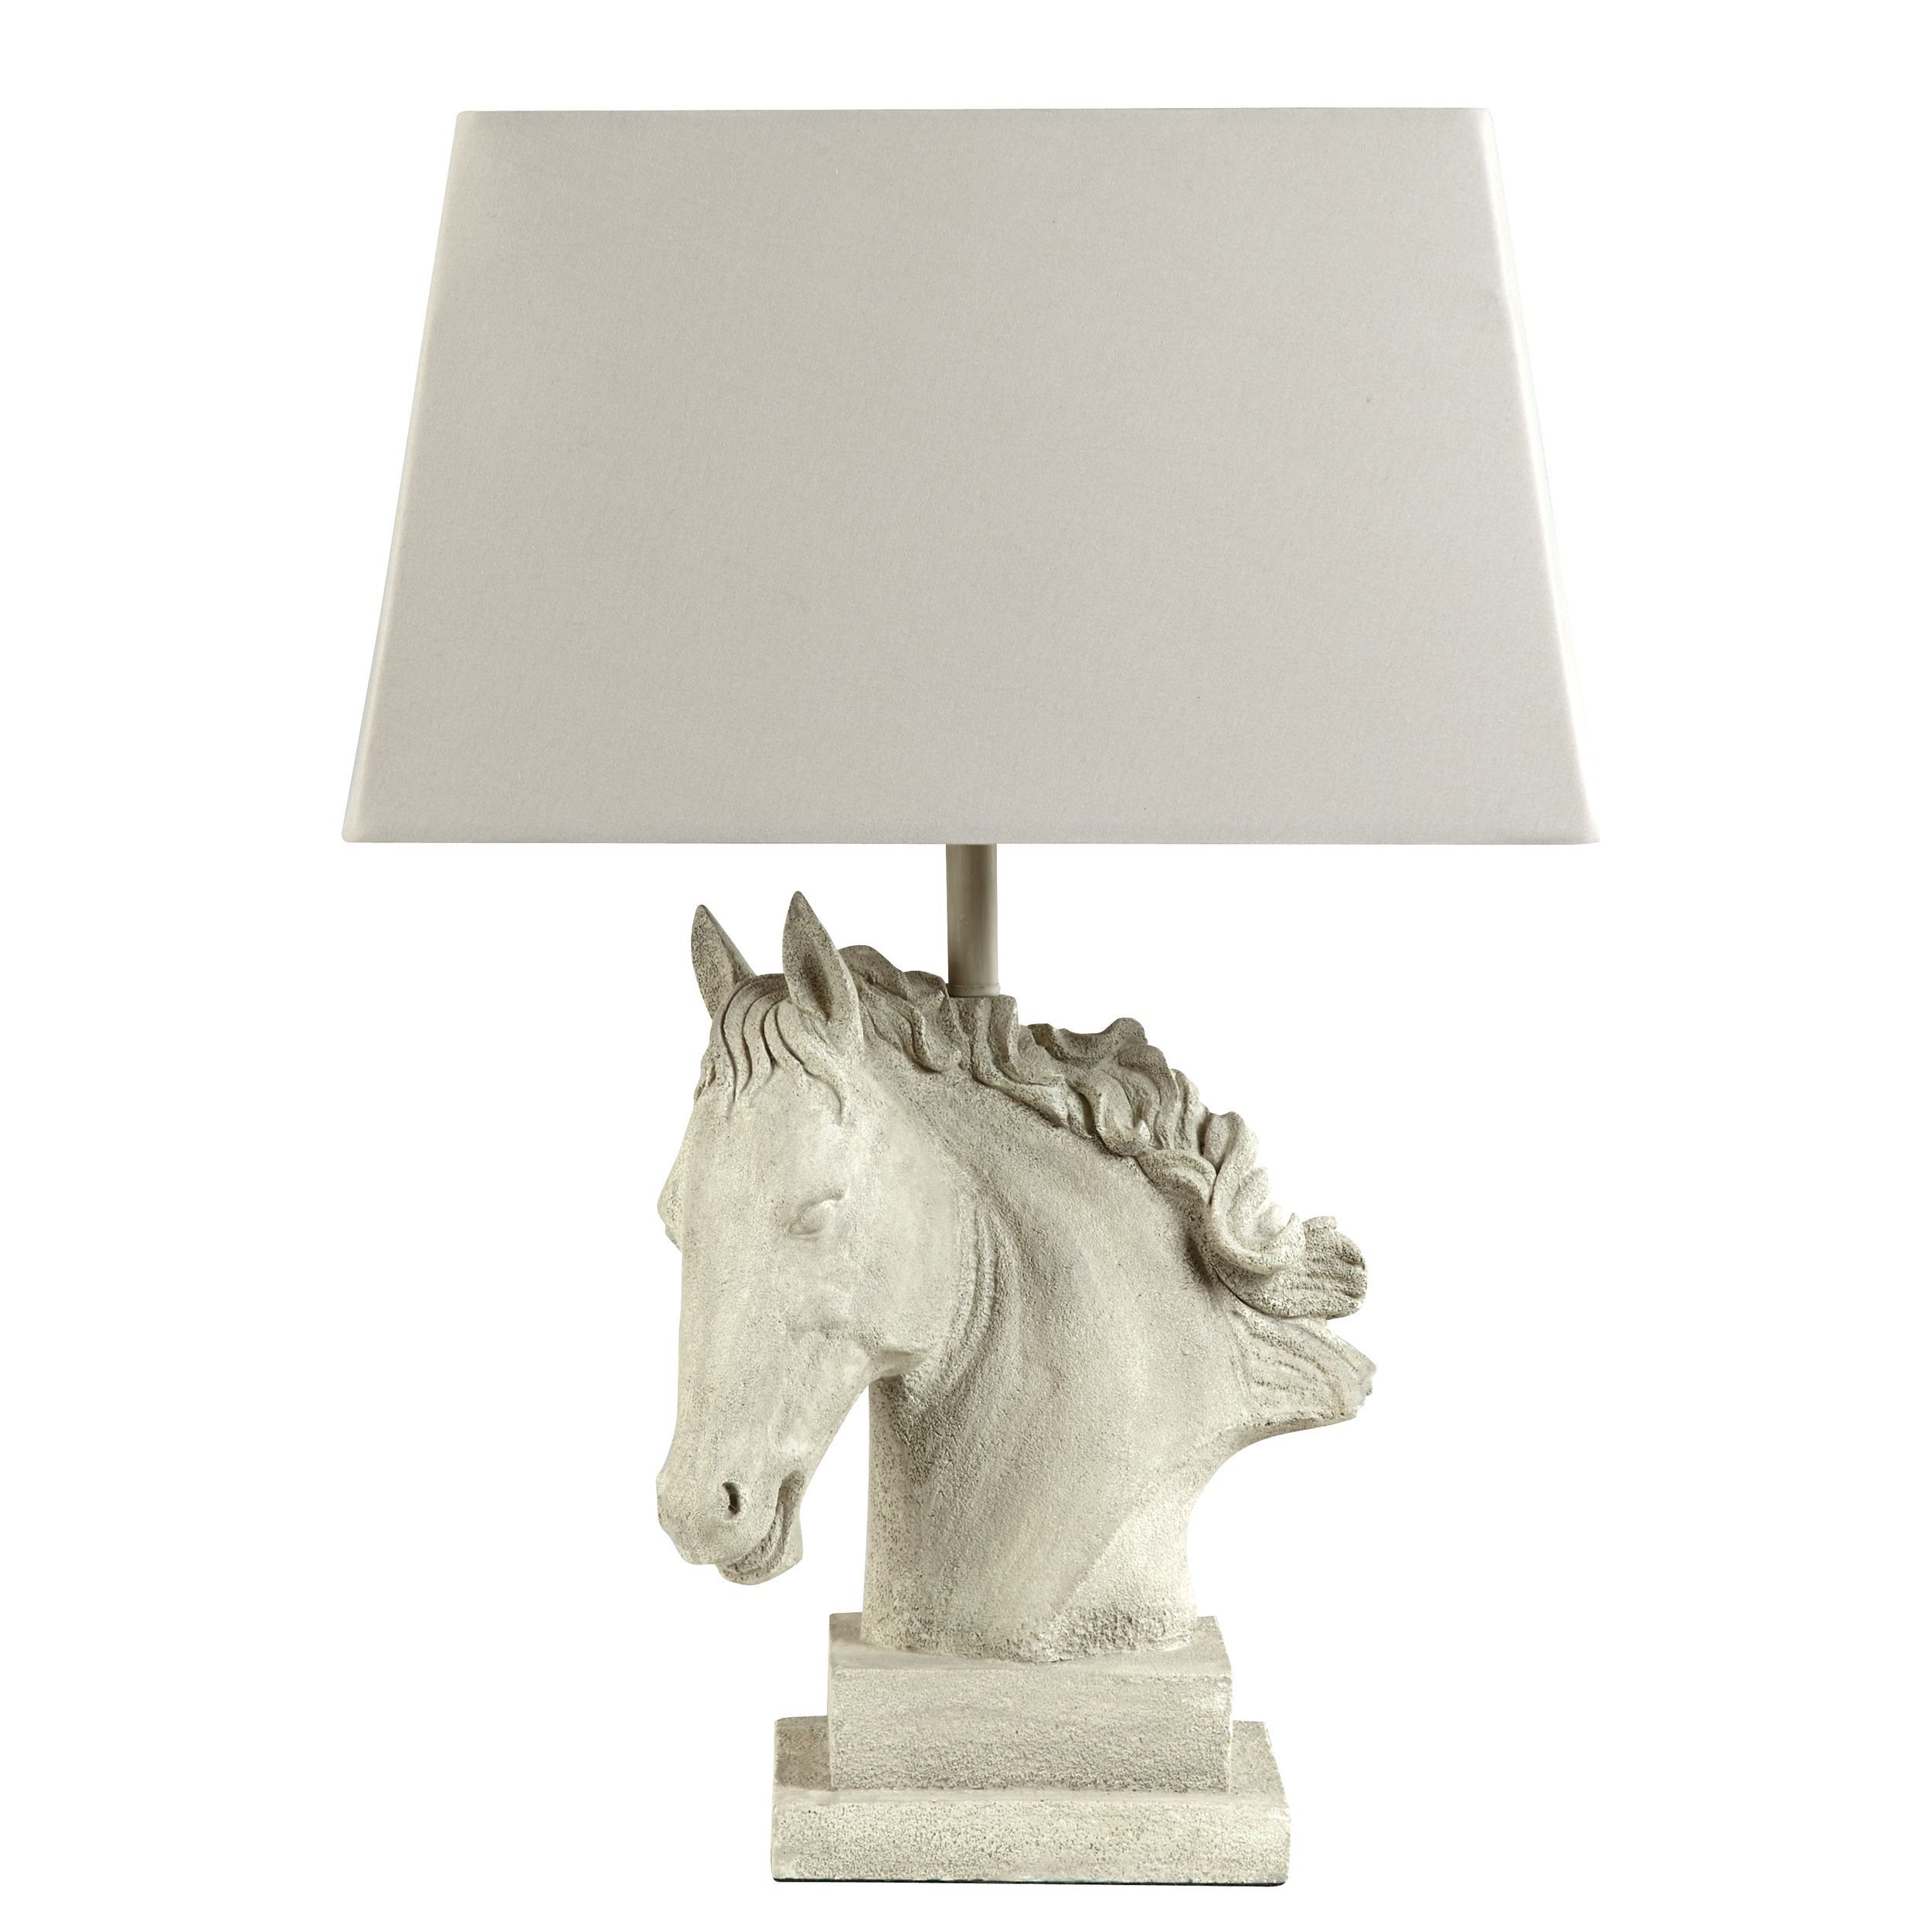 Grayson Horse Table Lamp With Sable Shade | It's A Horse Thing With Laura Ashley Table Lamps For Living Room (View 2 of 15)